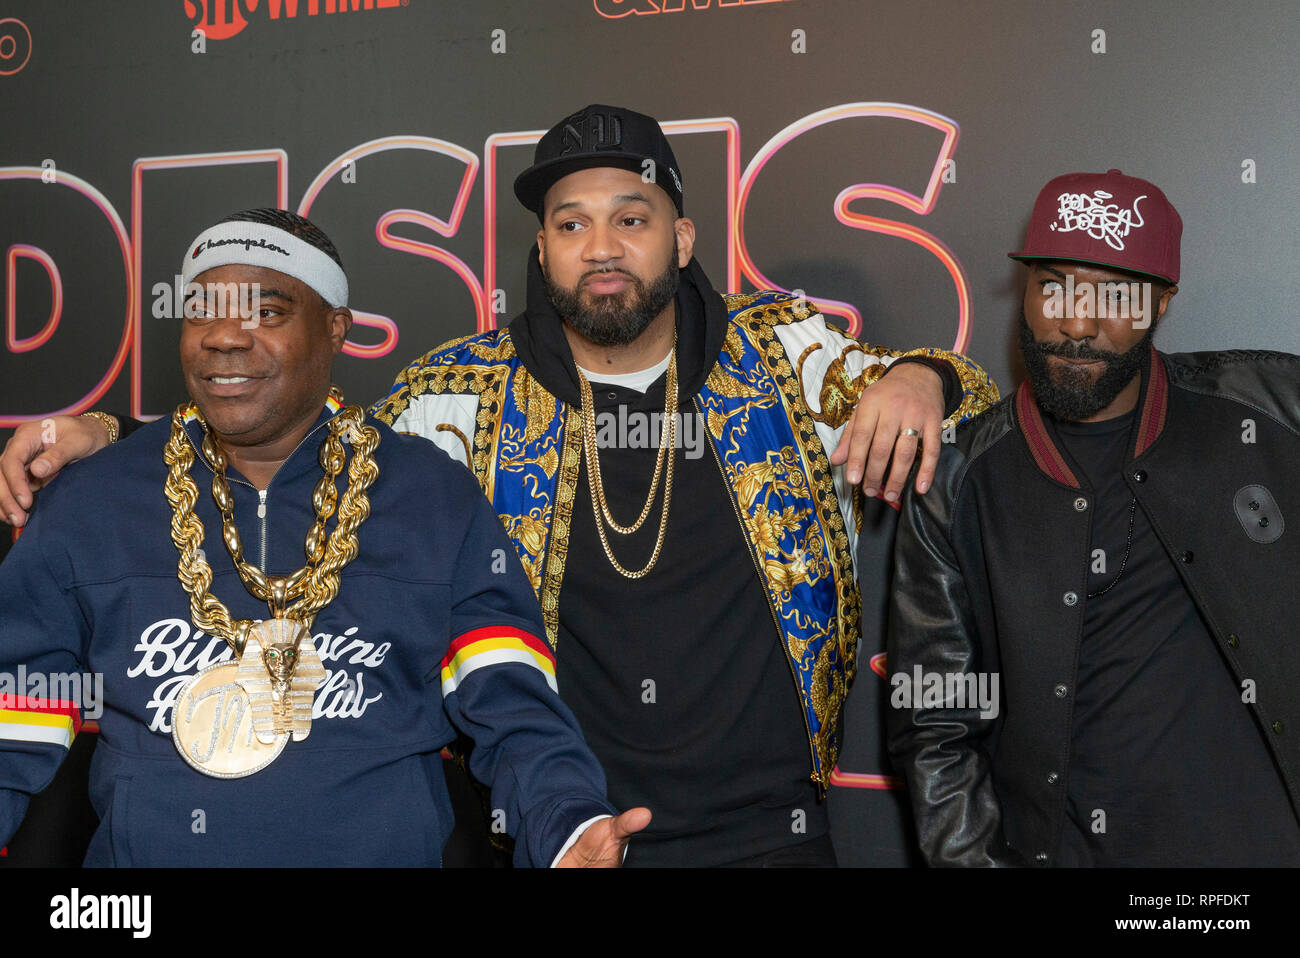 New York, United States. 21st Feb, 2019. New York, NY - February 21, 2019: Tracy Morgan, The Kid Mero, Desus Nice attend Showtime debut of Late-Night Series DESUS & MERO at the Clocktower New York Edition Credit: lev radin/Alamy Live News Stock Photo